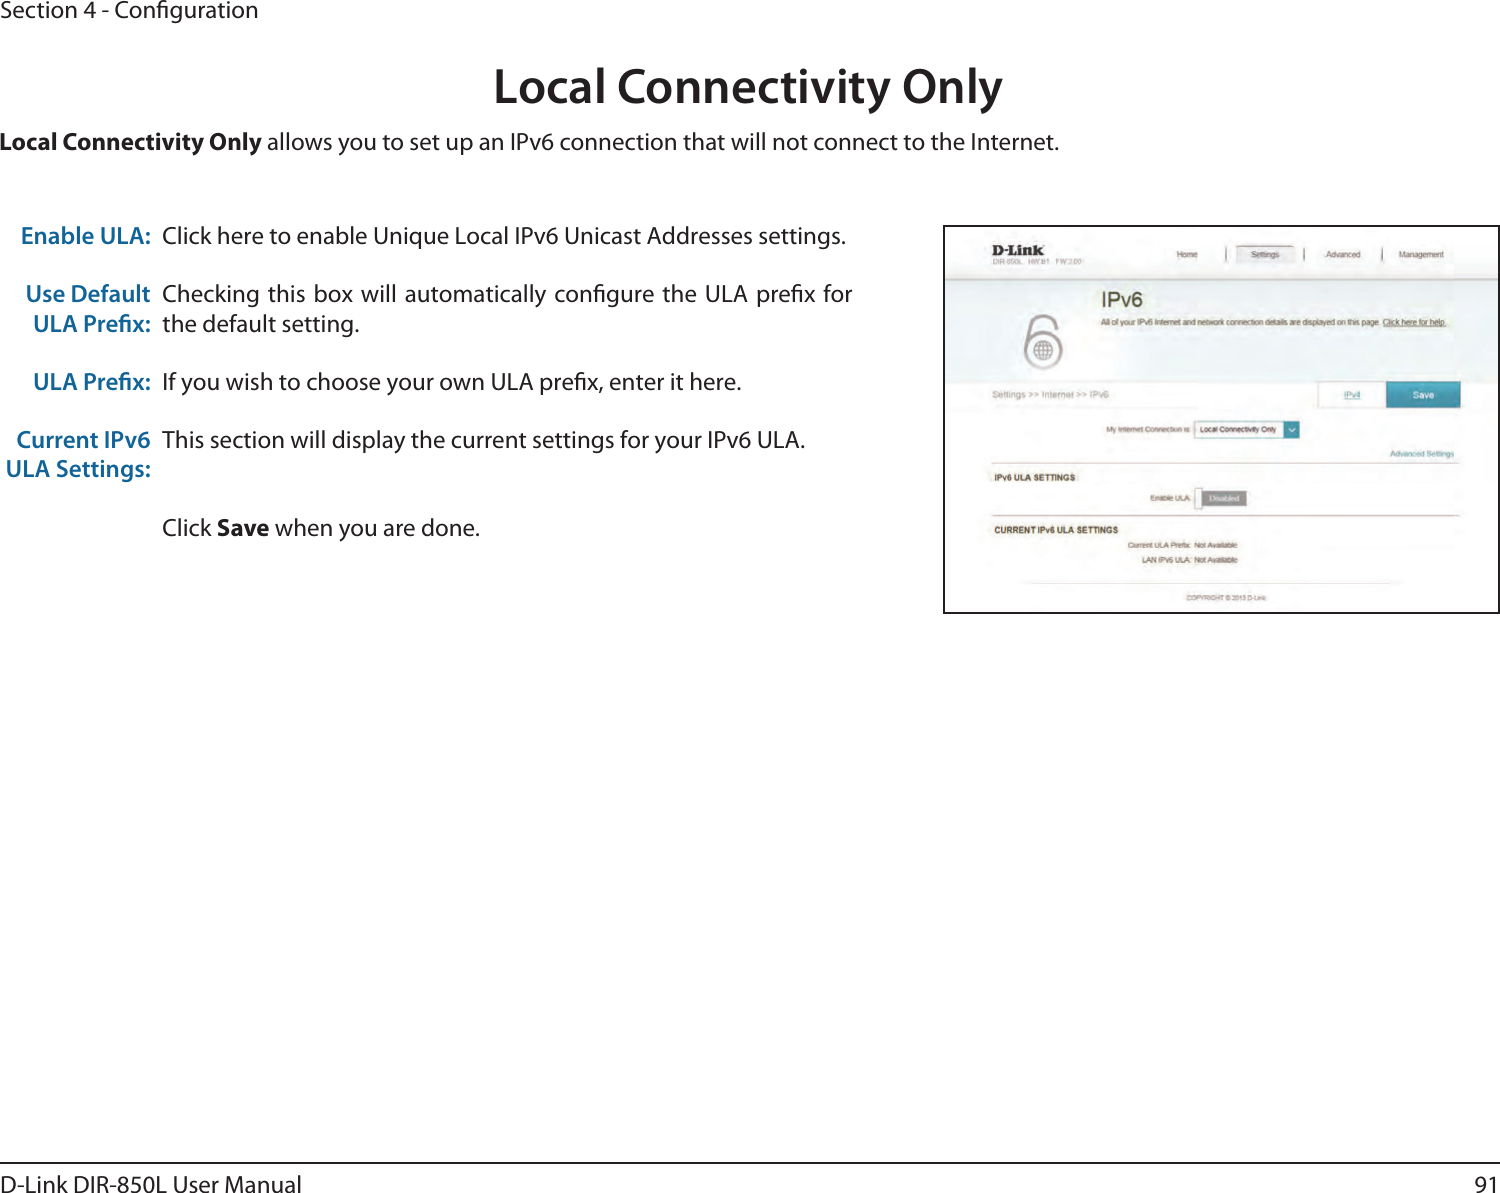 91D-Link DIR-850L User ManualSection 4 - CongurationLocal Connectivity OnlyClick here to enable Unique Local IPv6 Unicast Addresses settings.Checking this box will automatically congure the ULA prex for the default setting.If you wish to choose your own ULA prex, enter it here.This section will display the current settings for your IPv6 ULA.Click Save when you are done.Enable ULA:Use Default ULA Prex:ULA Prex:Current IPv6 ULA Settings:Local Connectivity Only allows you to set up an IPv6 connection that will not connect to the Internet.